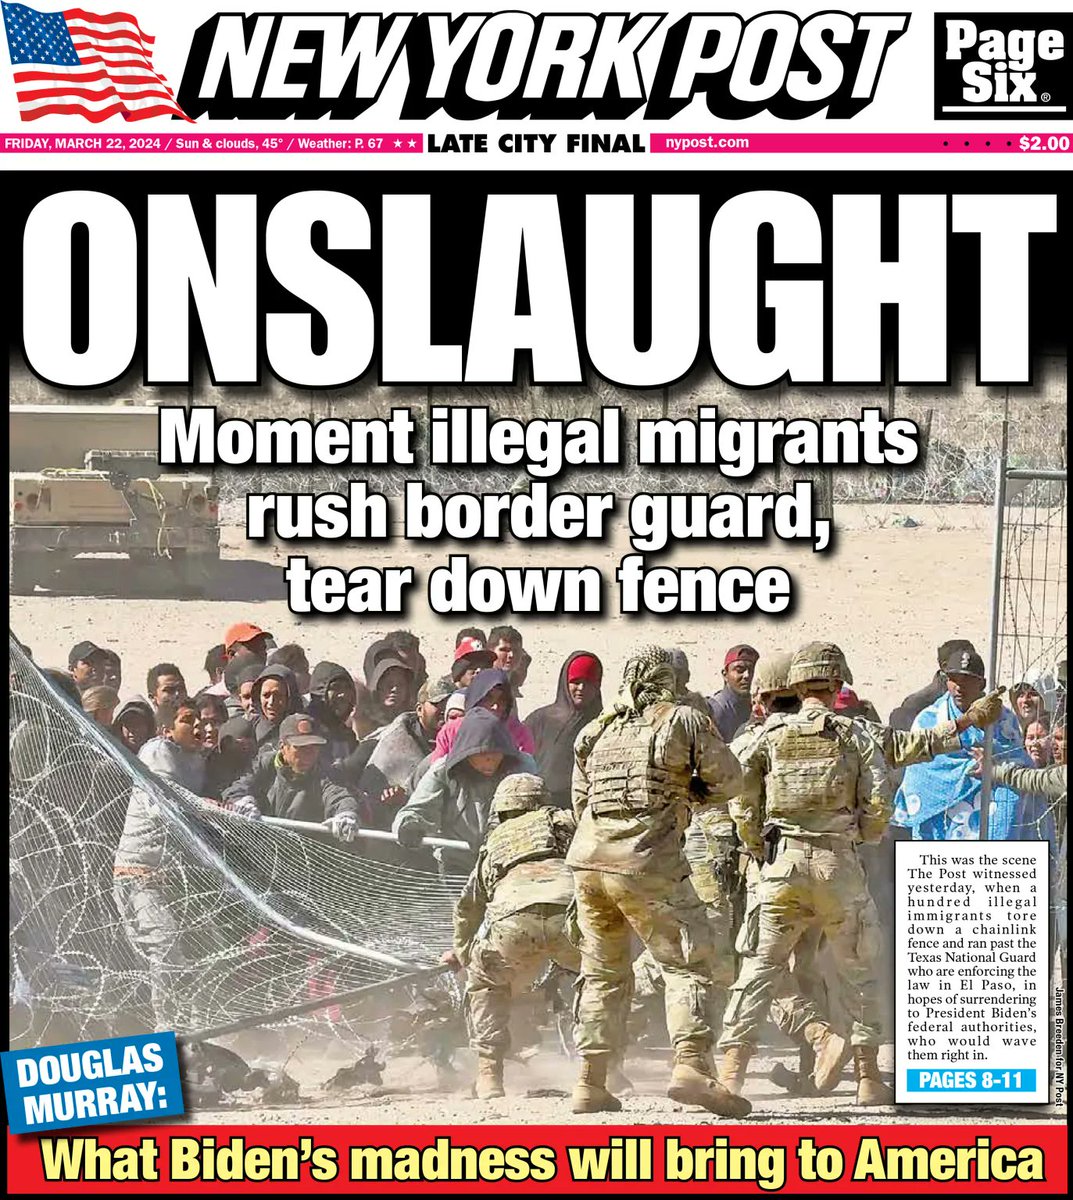 .@HouseGOP passed strong border legislation that would have prevented violent disasters like we just saw in Texas. Unfortunately, Joe Biden and the Far Left Democrats want to keep the border open and in utter chaos. @nypost